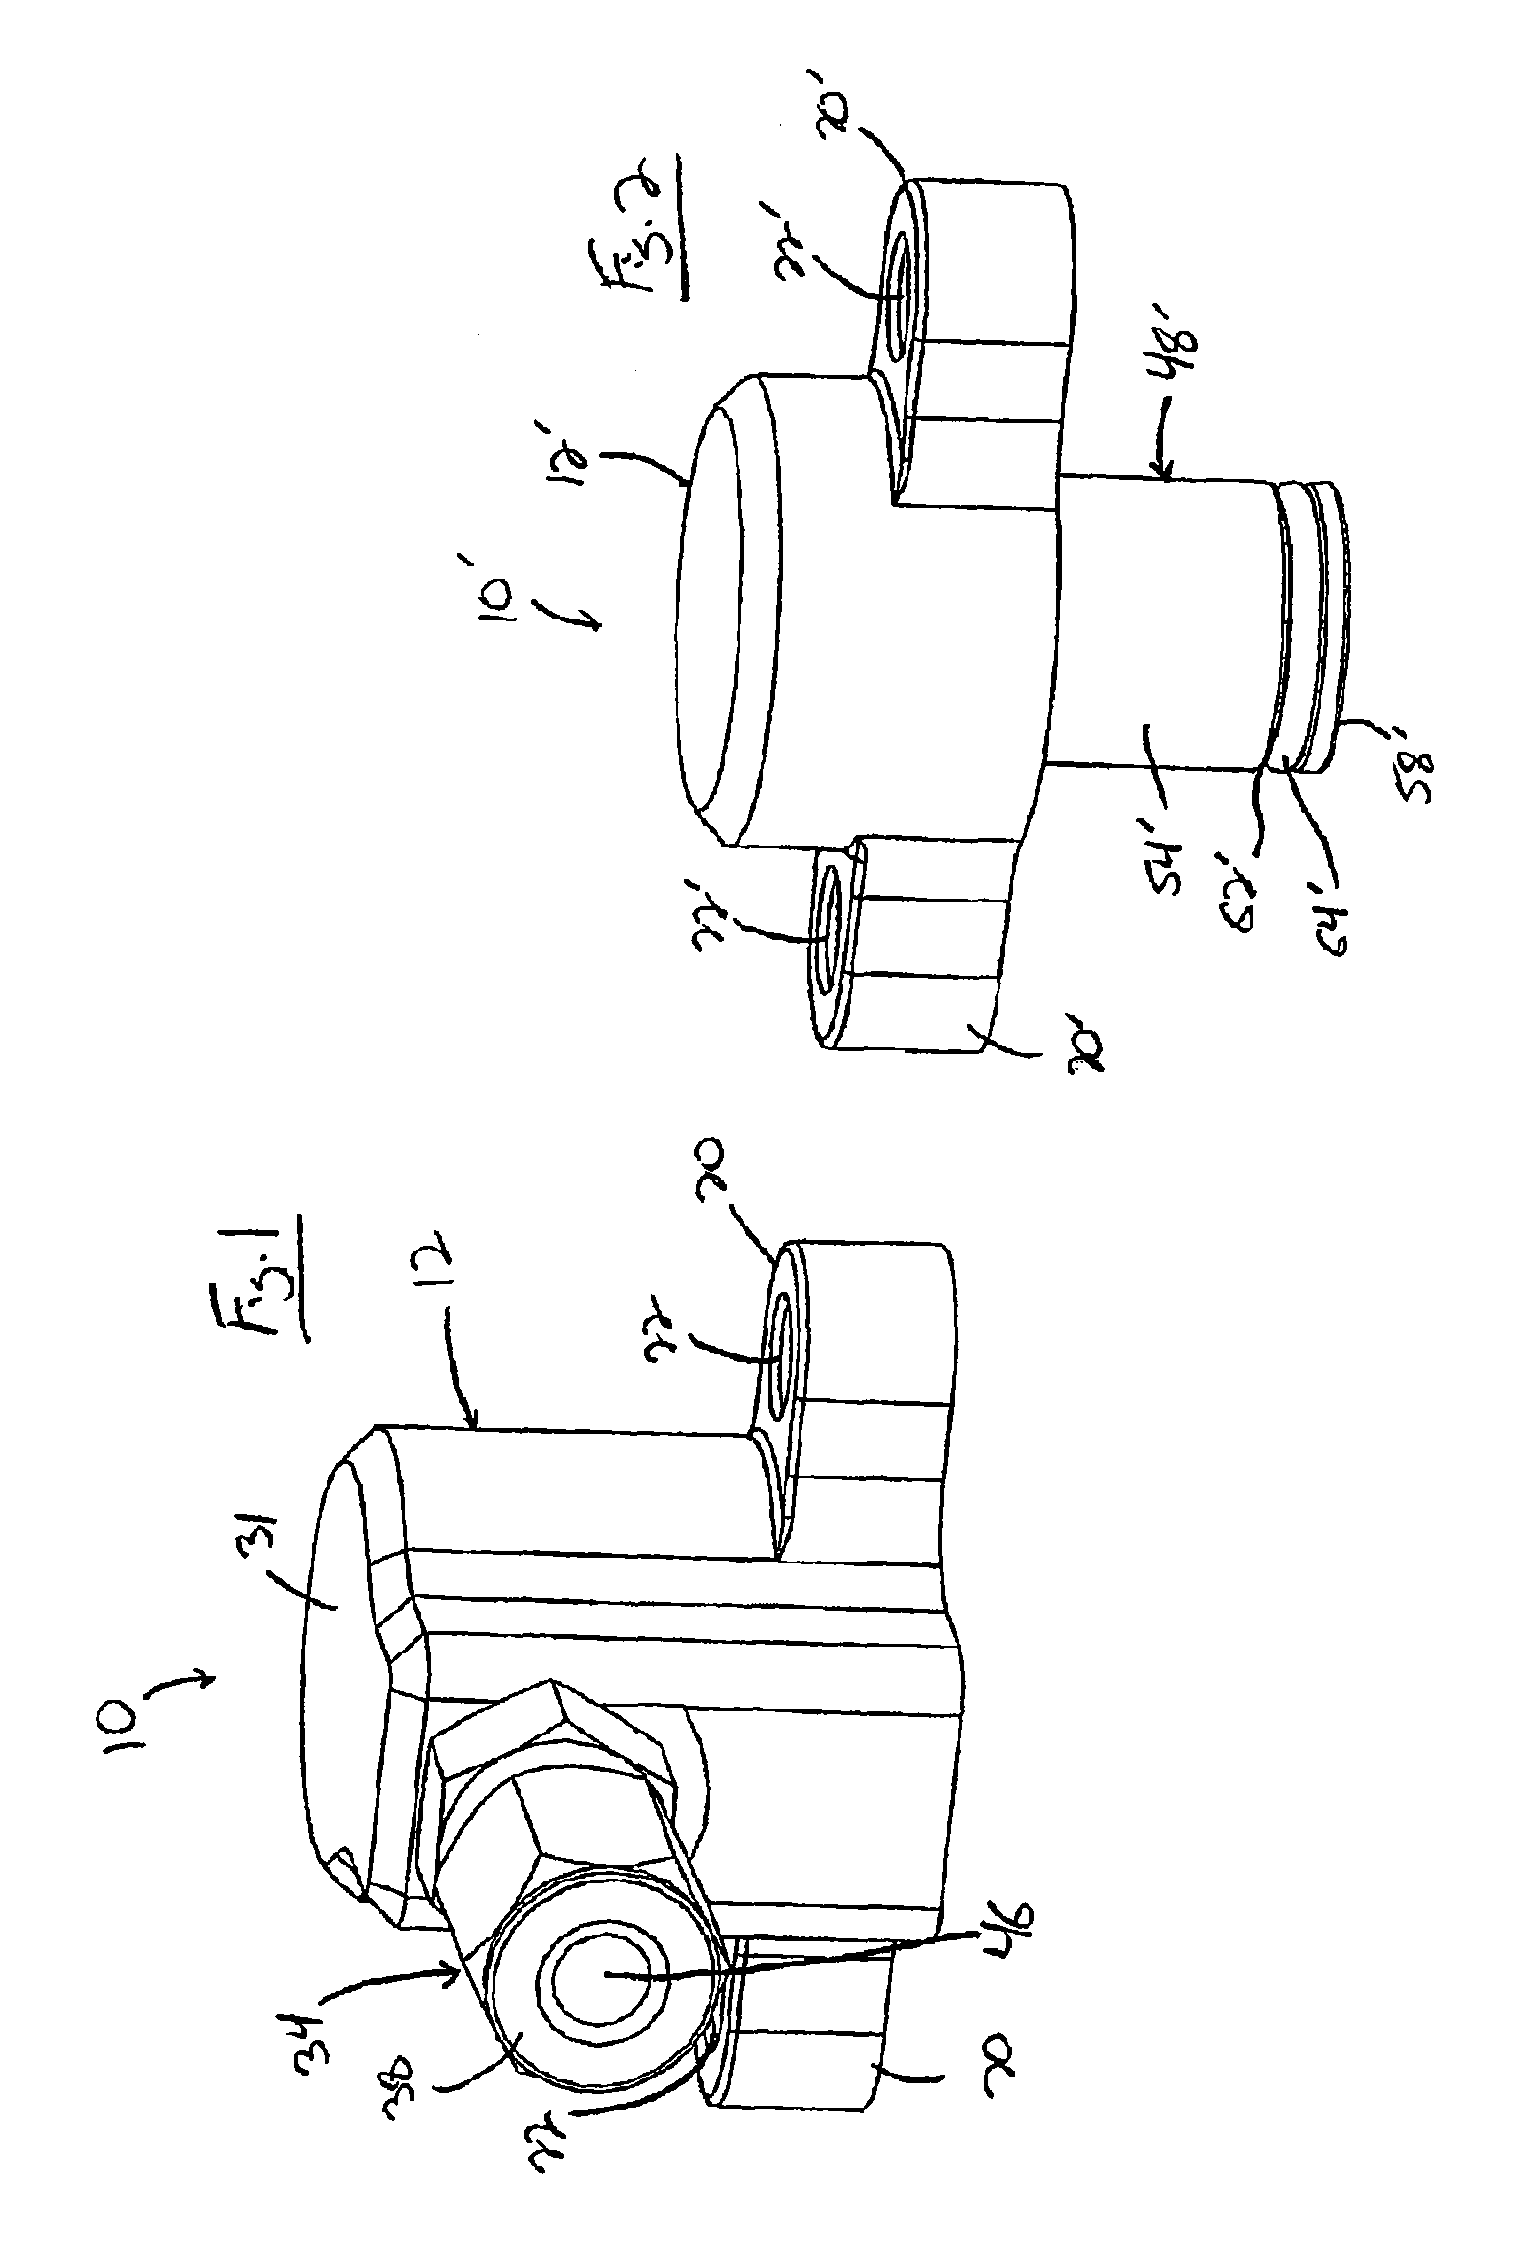 Central tire inflation wheel assembly and valve